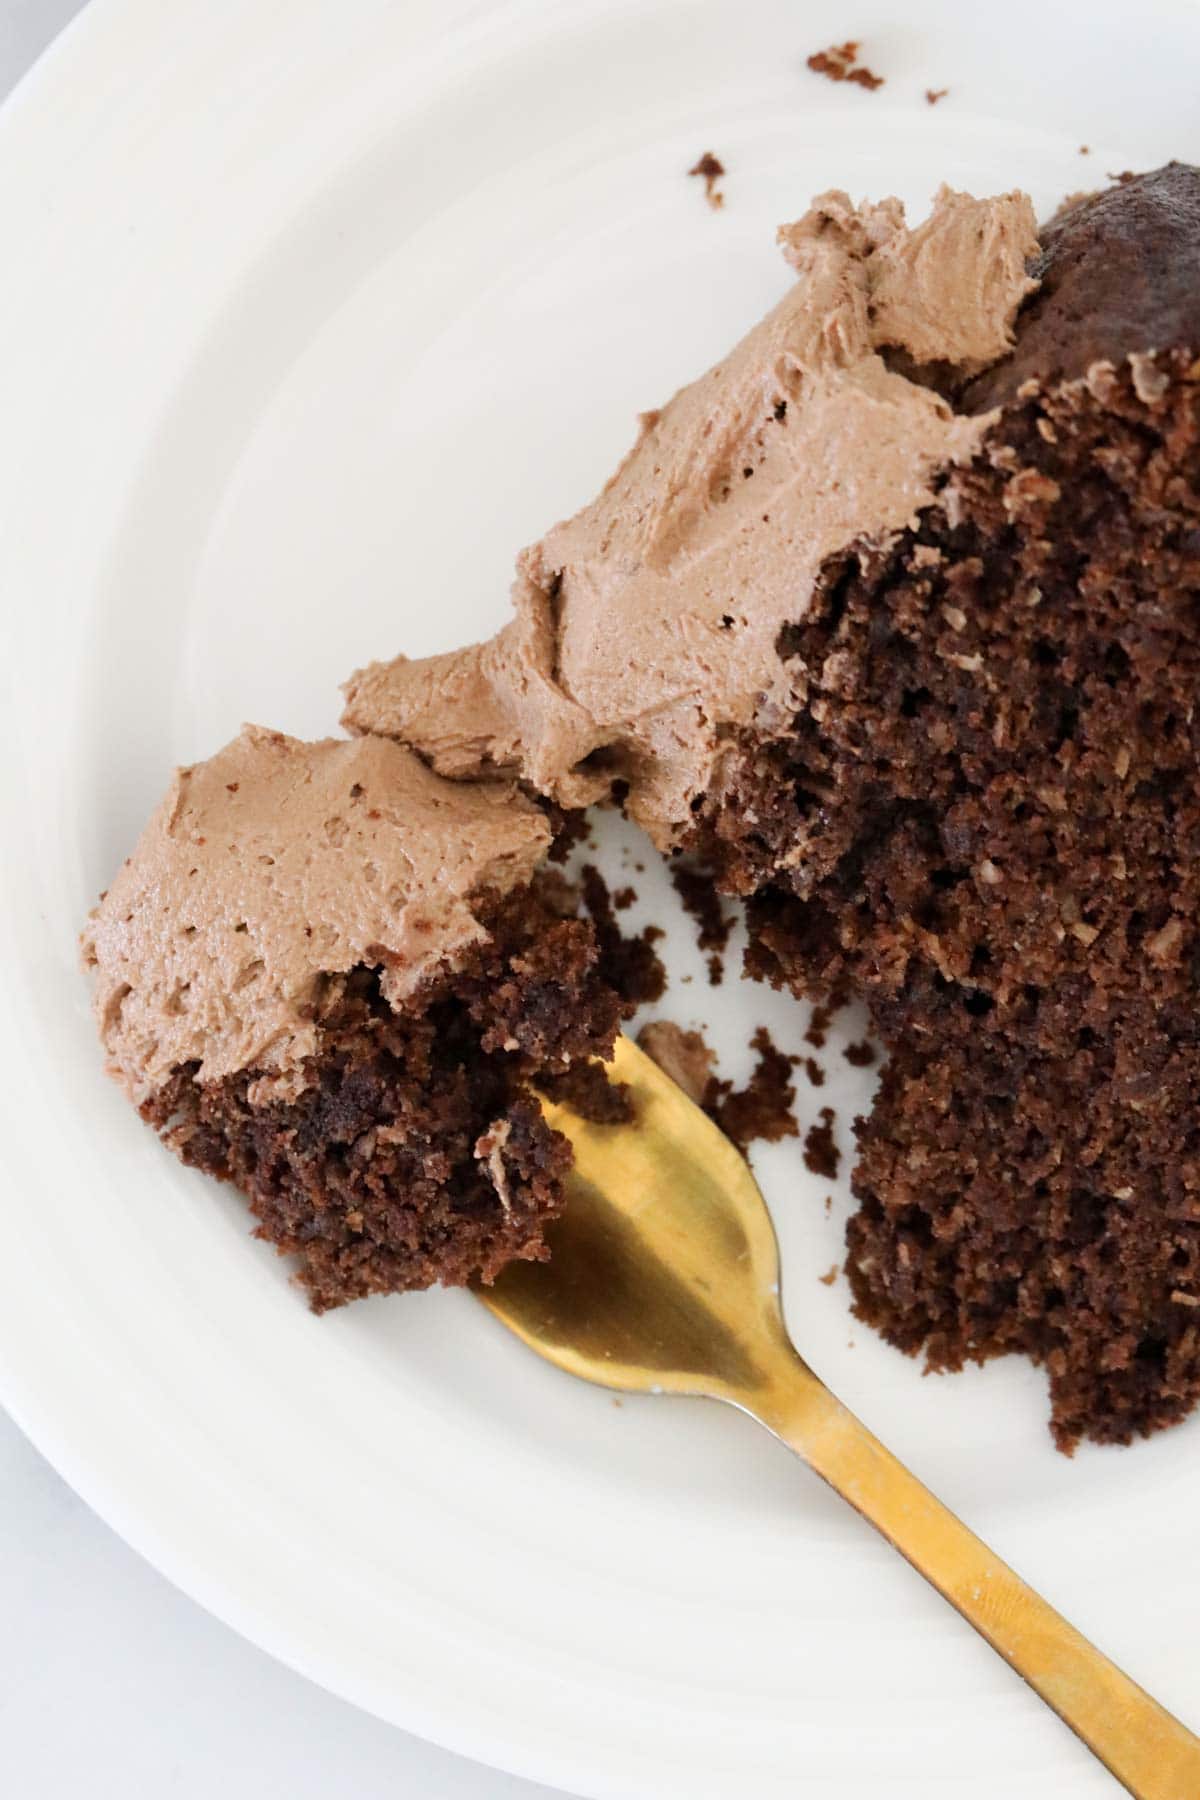 A forkful of chocolate cake with chocolate buttercream on a white plate.